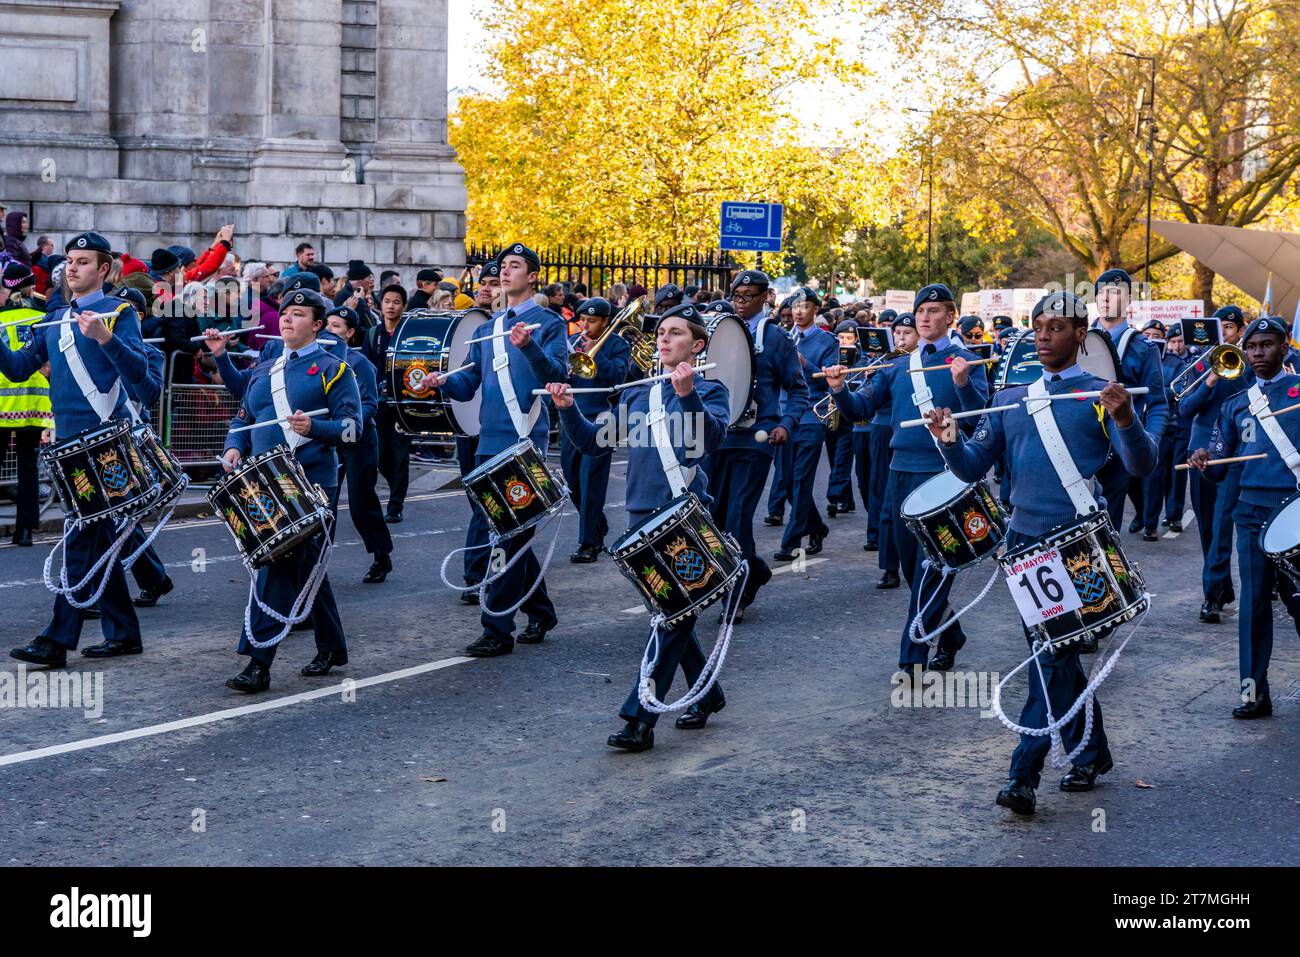 The Royal Air Force Air Cadets Marching At The Lord Mayor's Show, London, UK Stock Photo